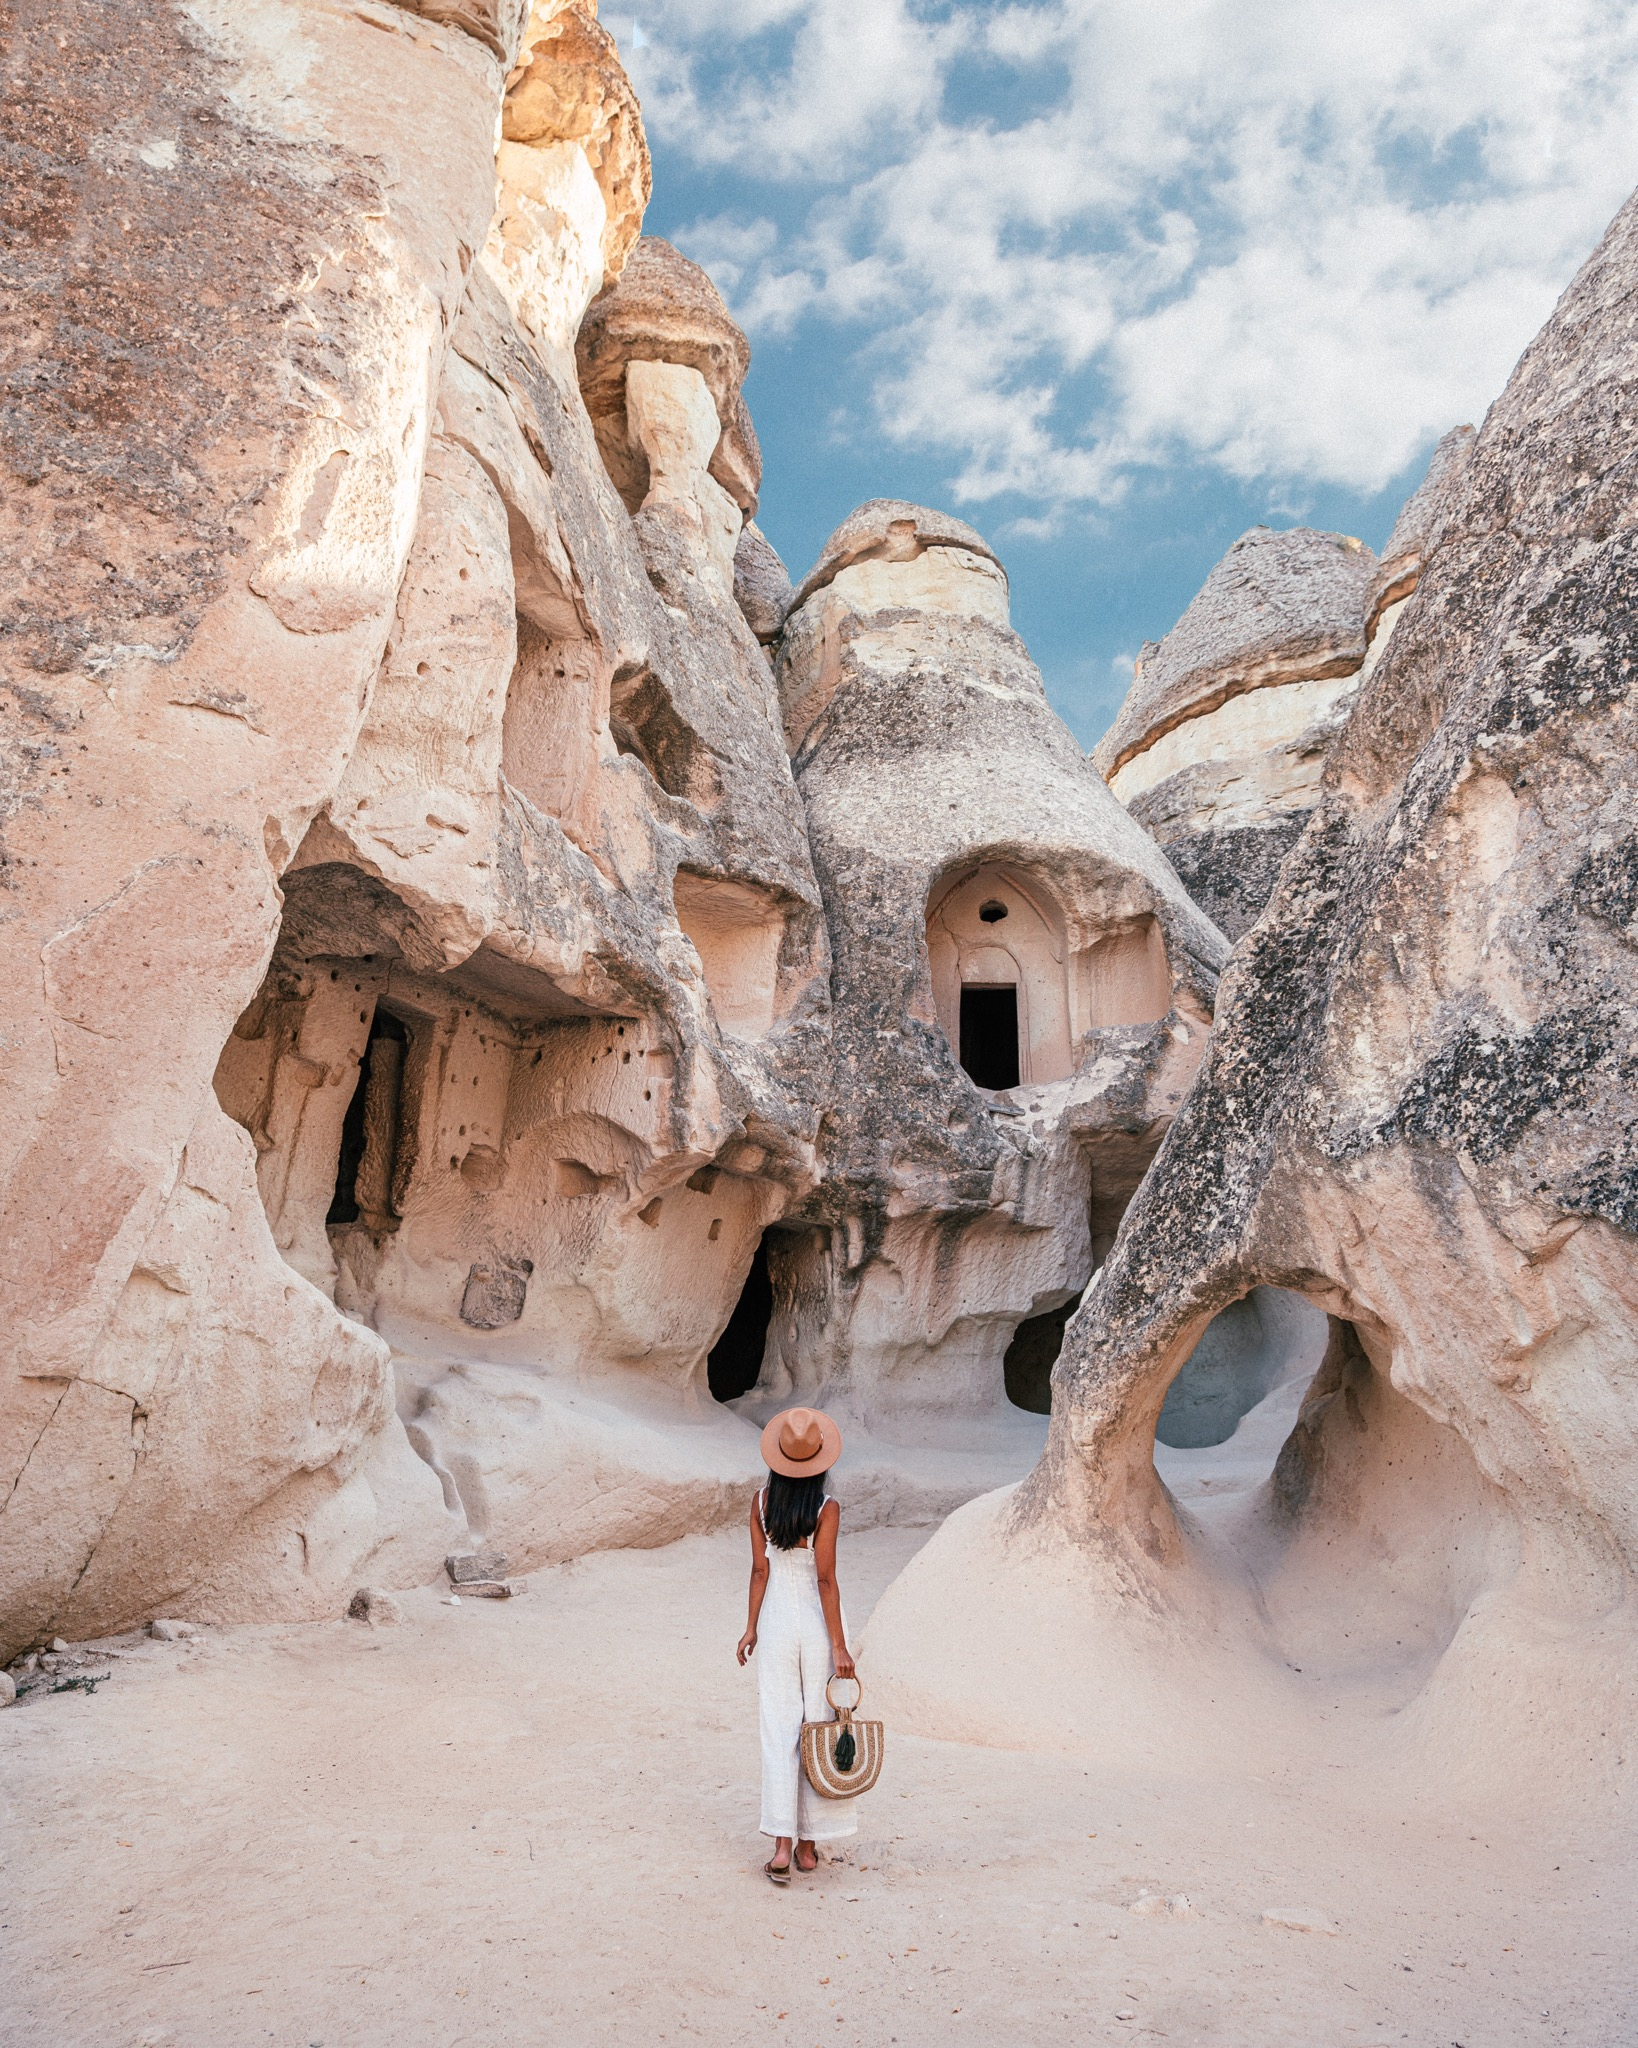 The ultimate guide to Cappadocia including the best cave hotels, sunrise spots, hot air balloon companies, restaurants, cave pools and more.